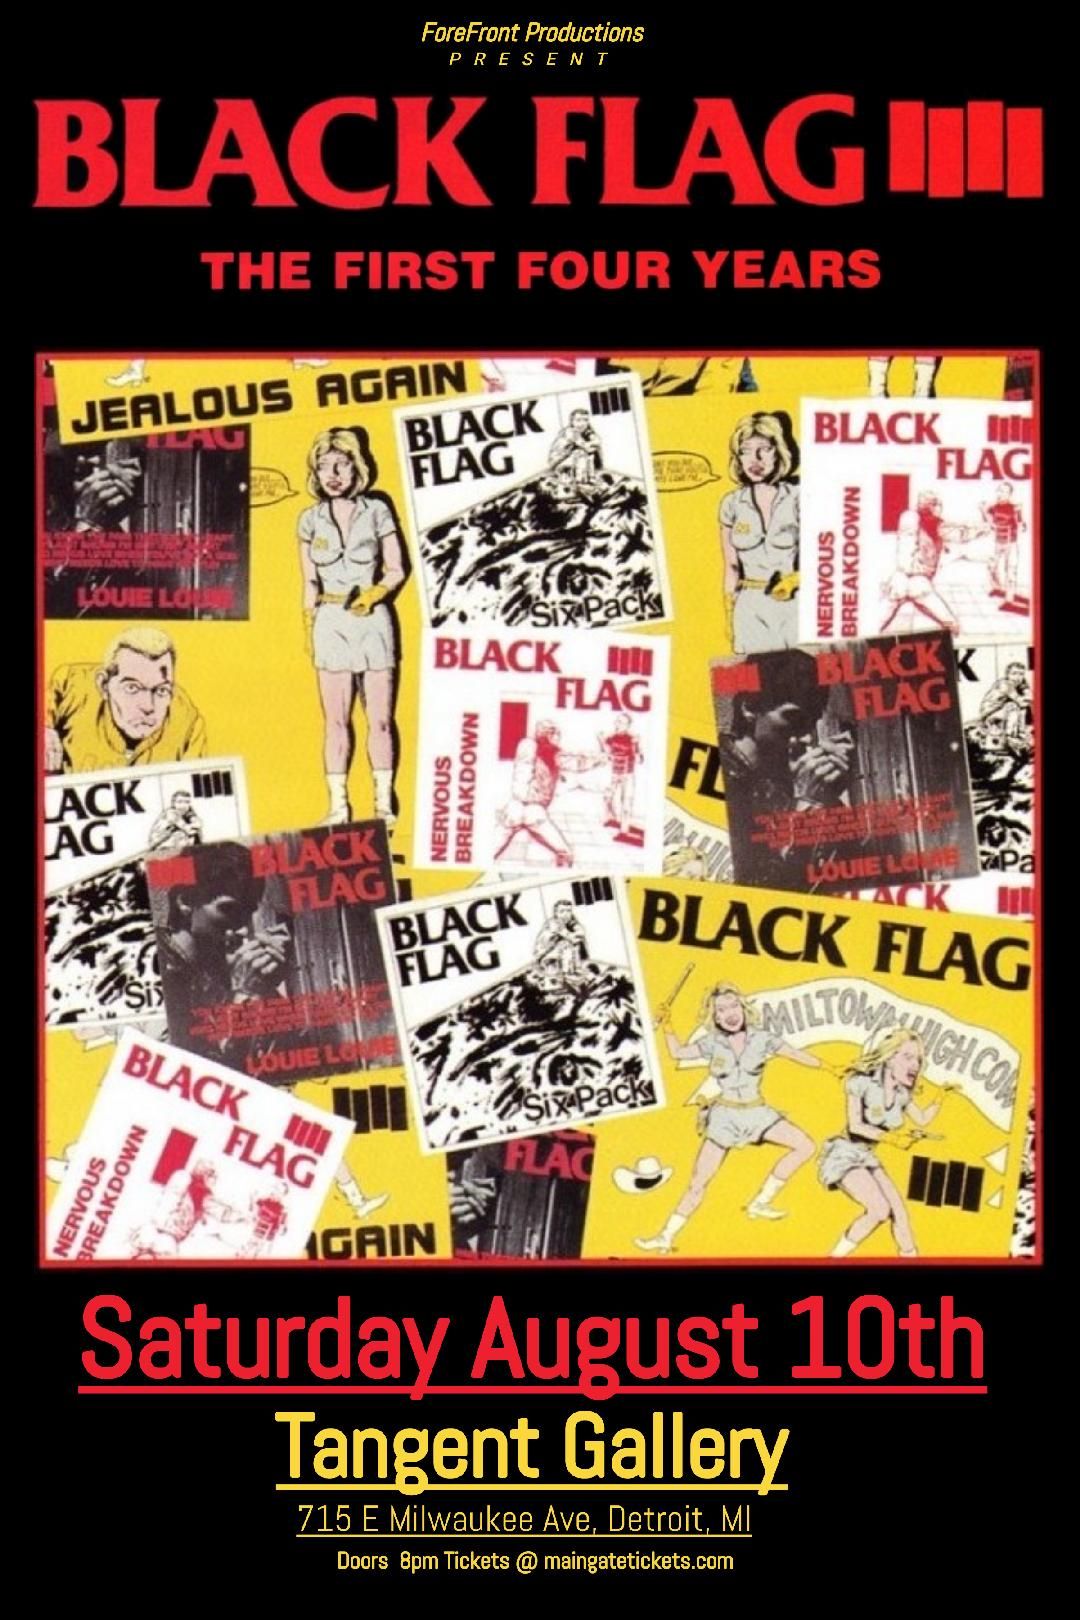 BLACK FLAG Live at Tangent Gallery, Detroit - Aug. 10th